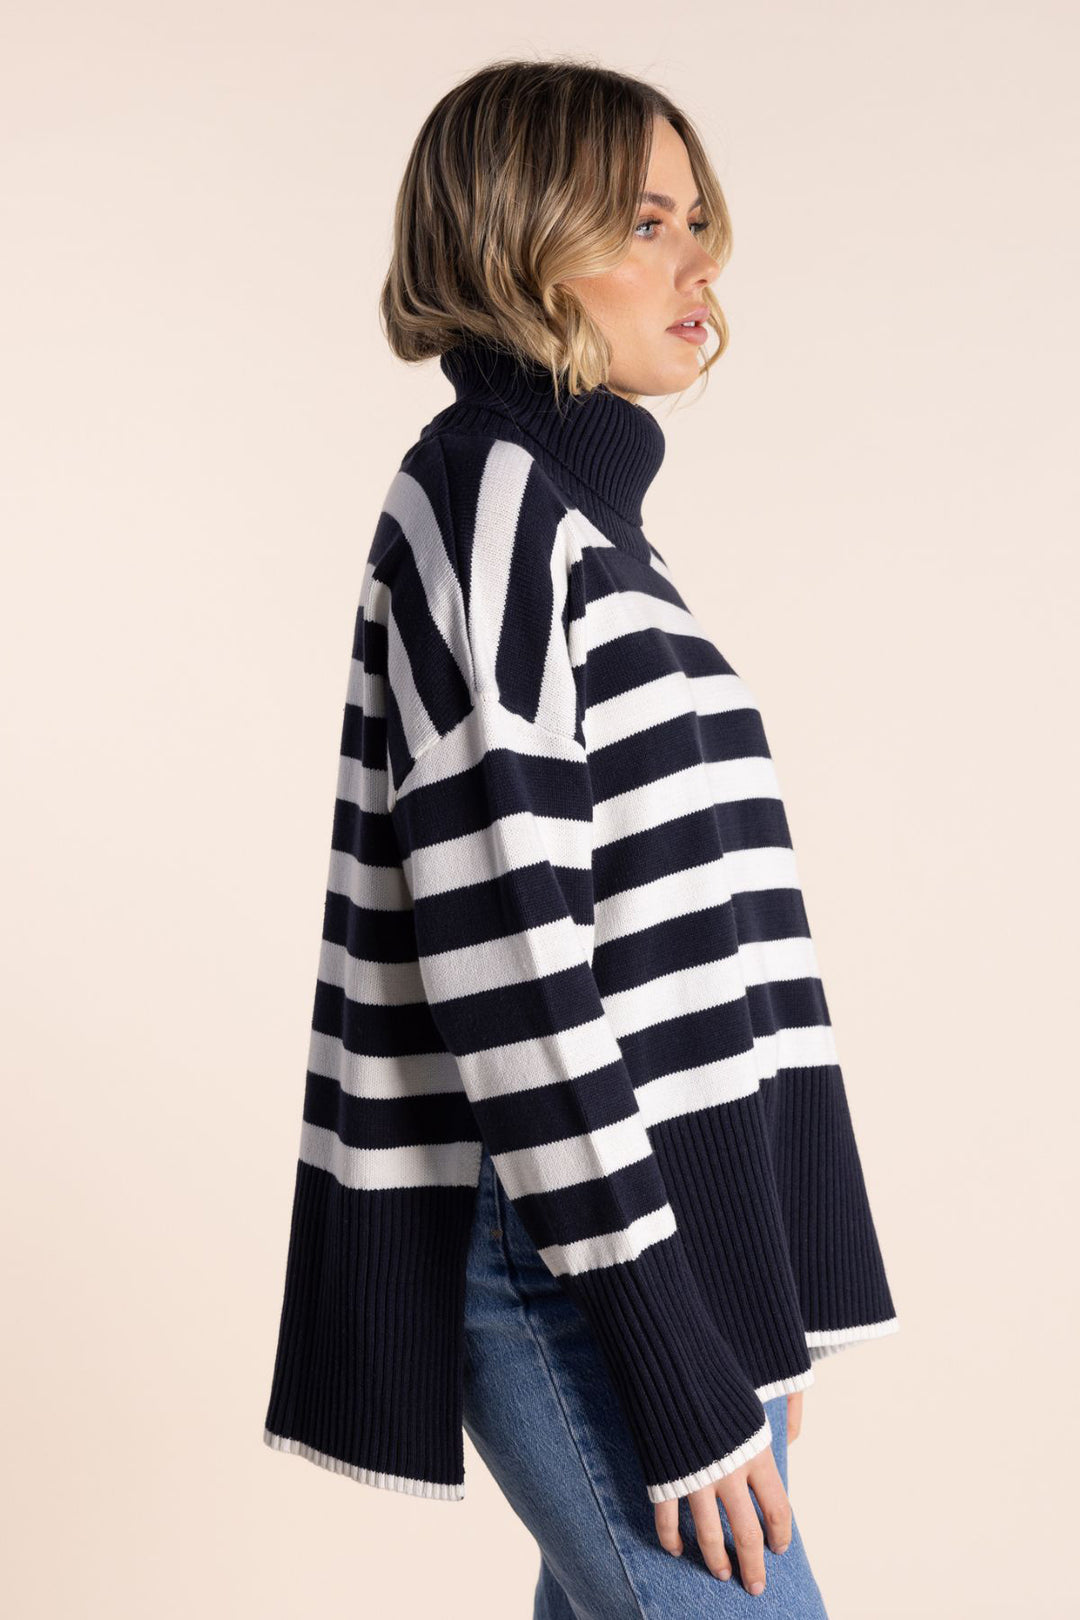 Brand : Two T's Style Code : 2557 Detachable Neck Stripe Sweater Colour : White Ink Fabric : 60% Cotton 40% Acrylic Delicate cold machine wash Removable cowl neck to give you options in all weather Side splits Long sleeve